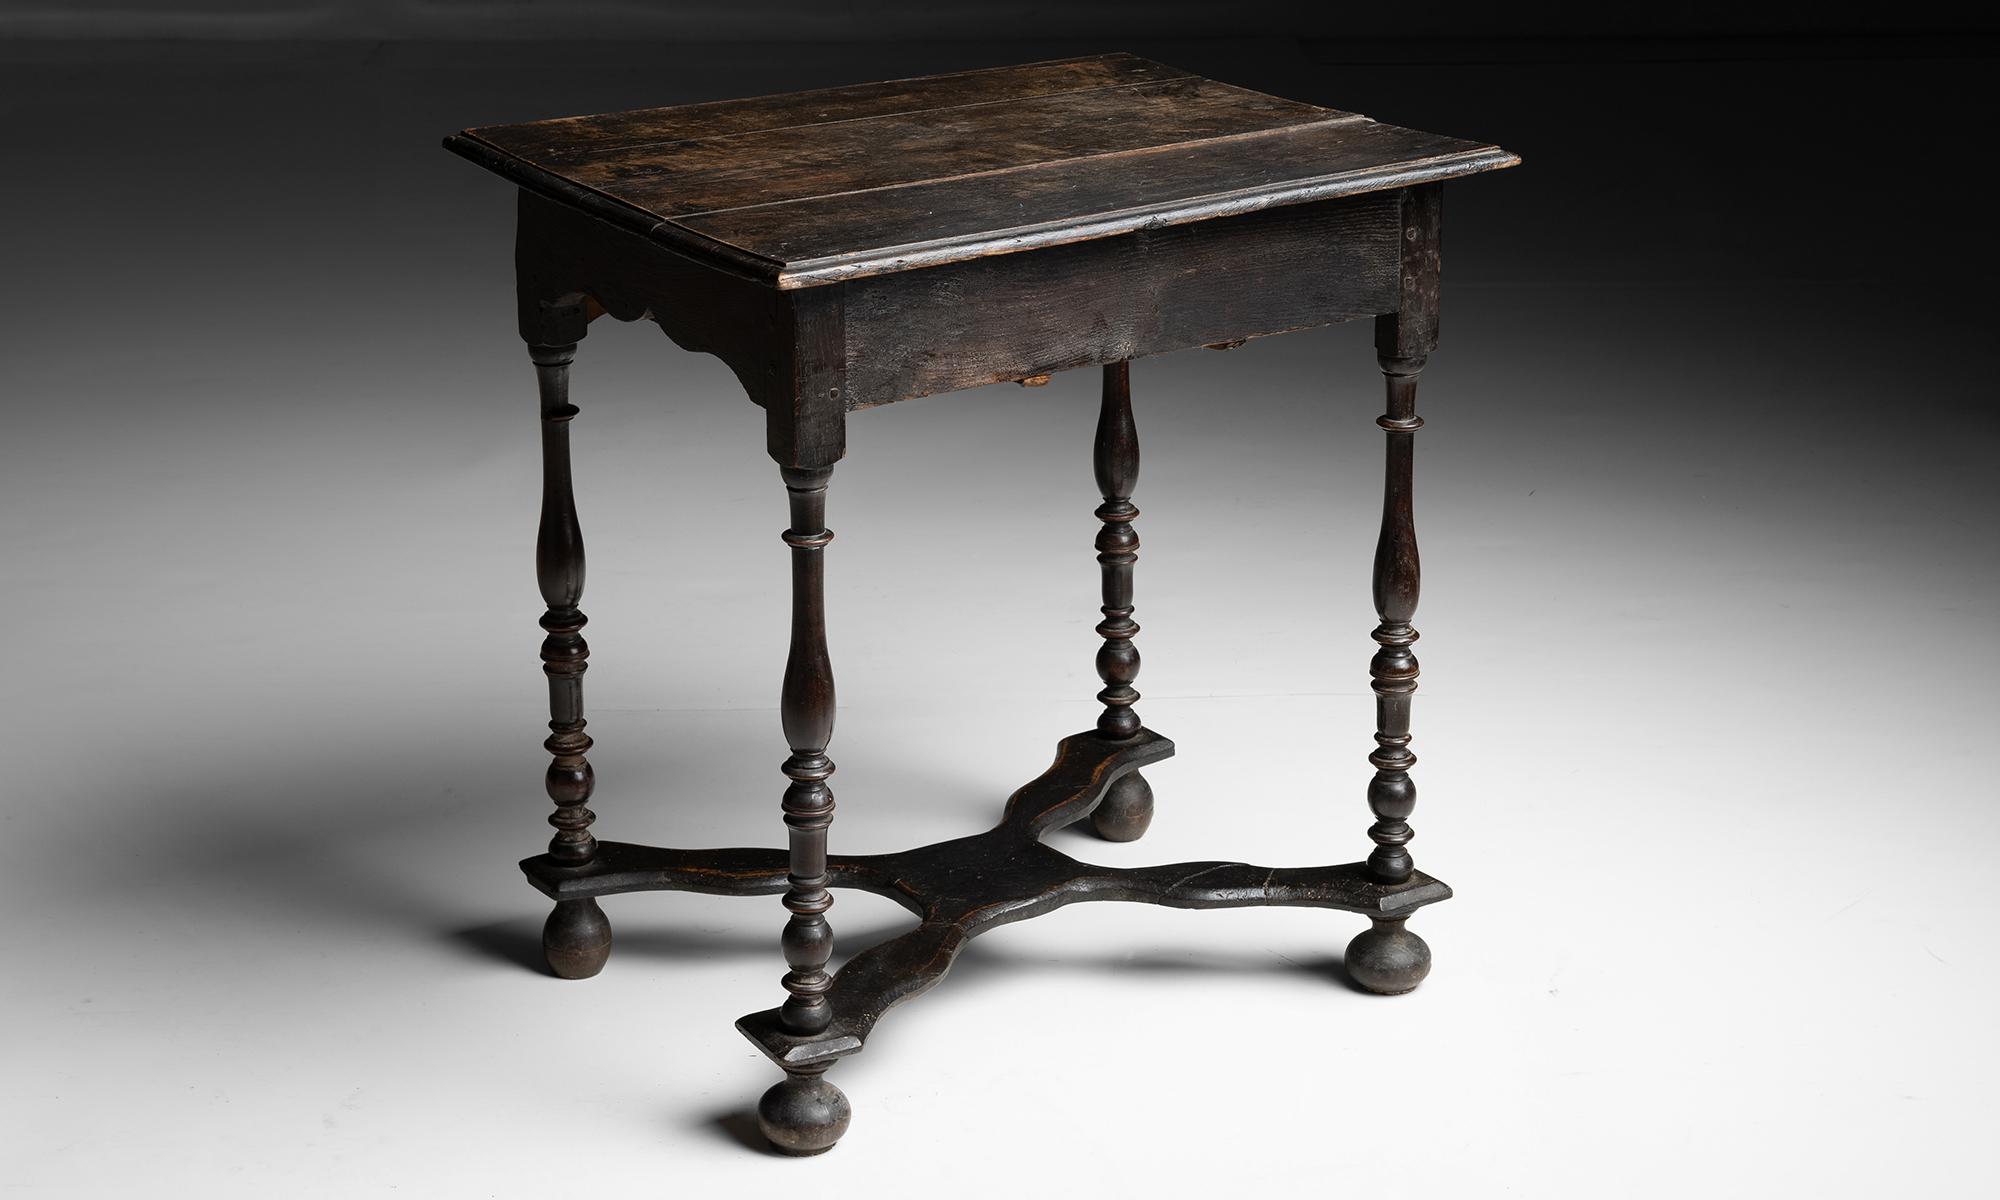 Table d'appoint ébonisée, Angleterre vers 1680 1